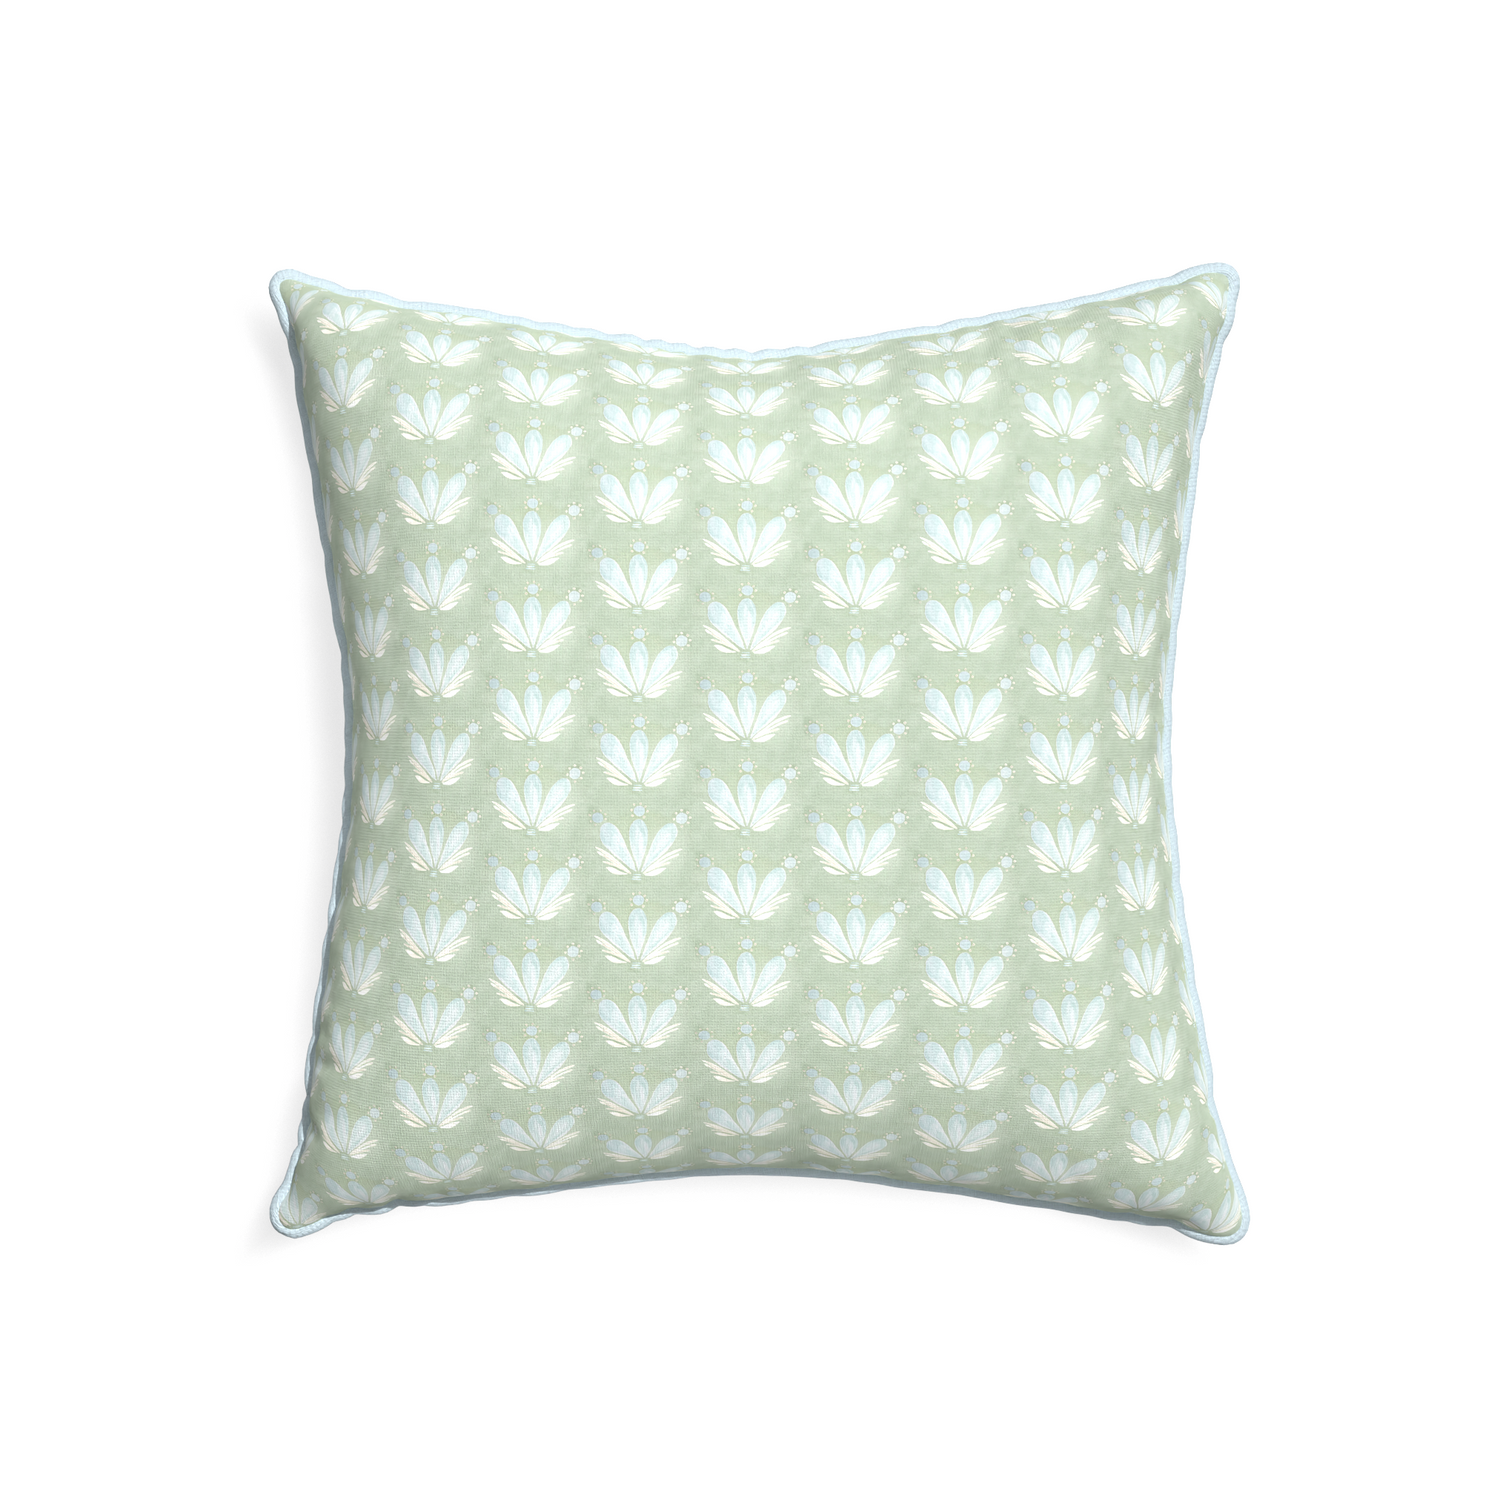 22-square serena sea salt custom blue & green floral drop repeatpillow with powder piping on white background